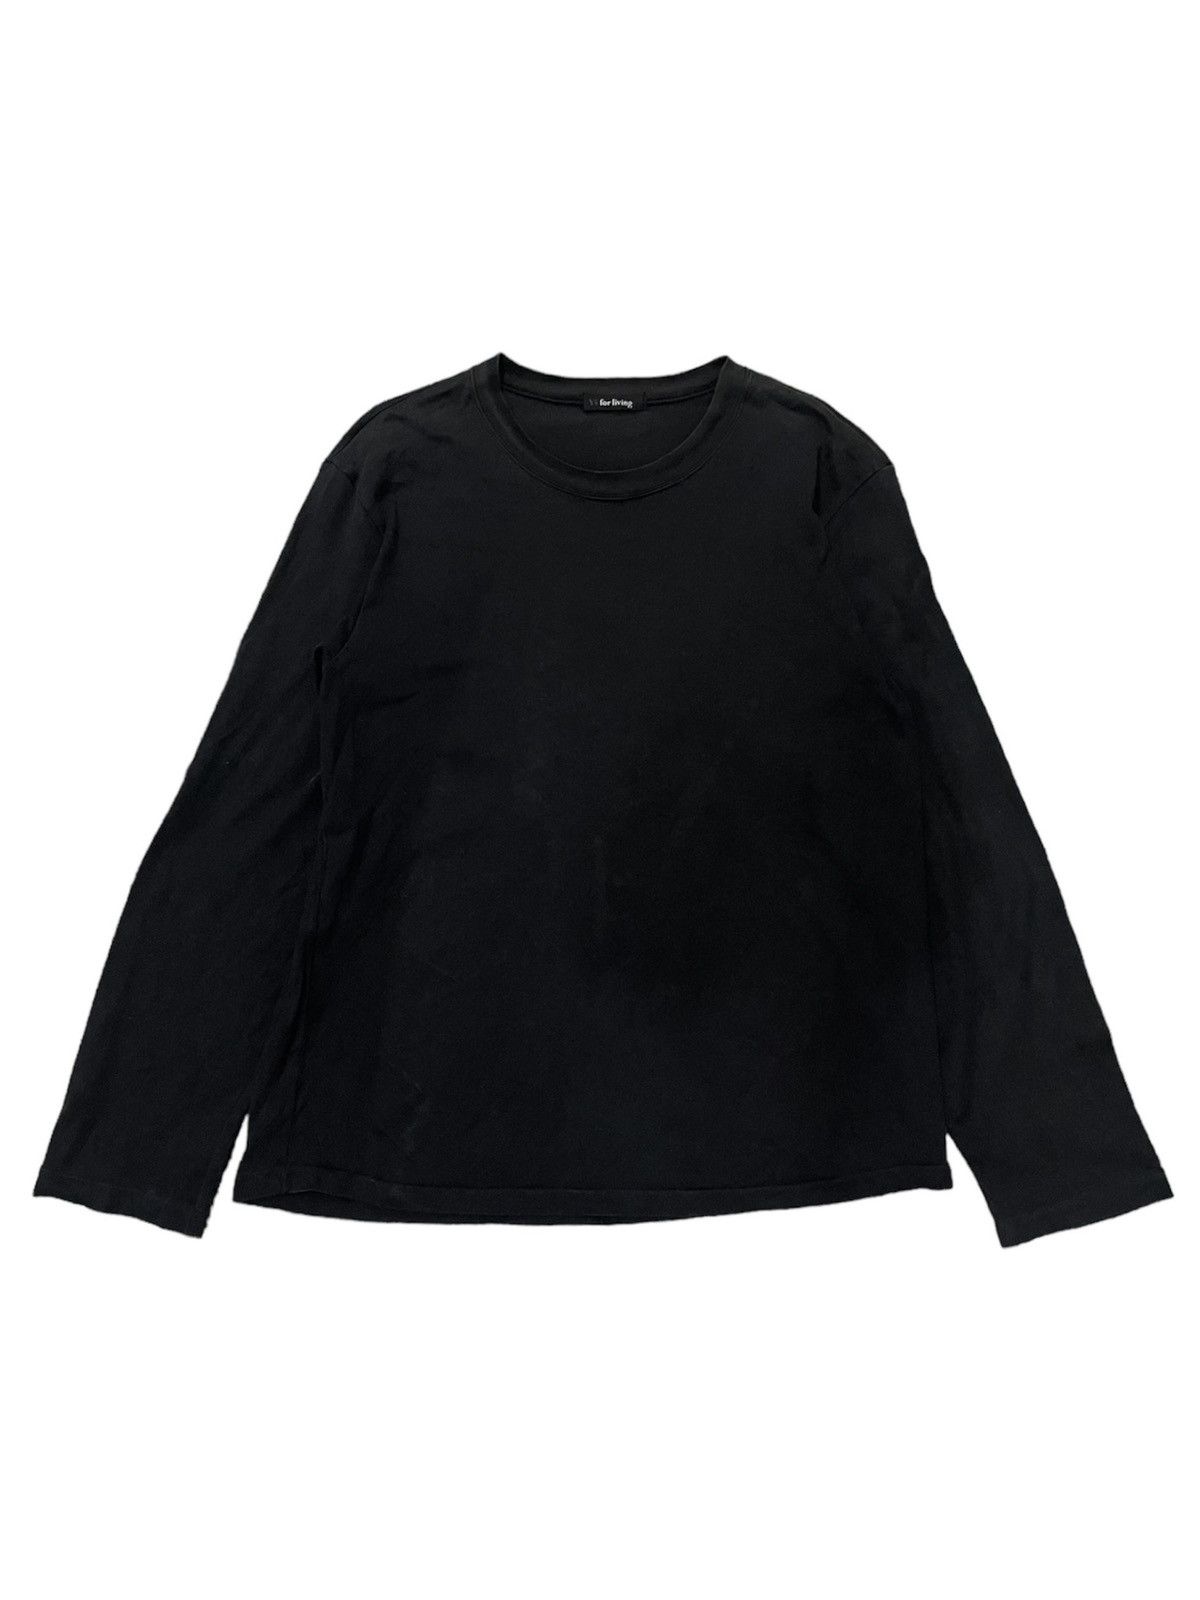 YS’ For Living L/S Round Neck - 1